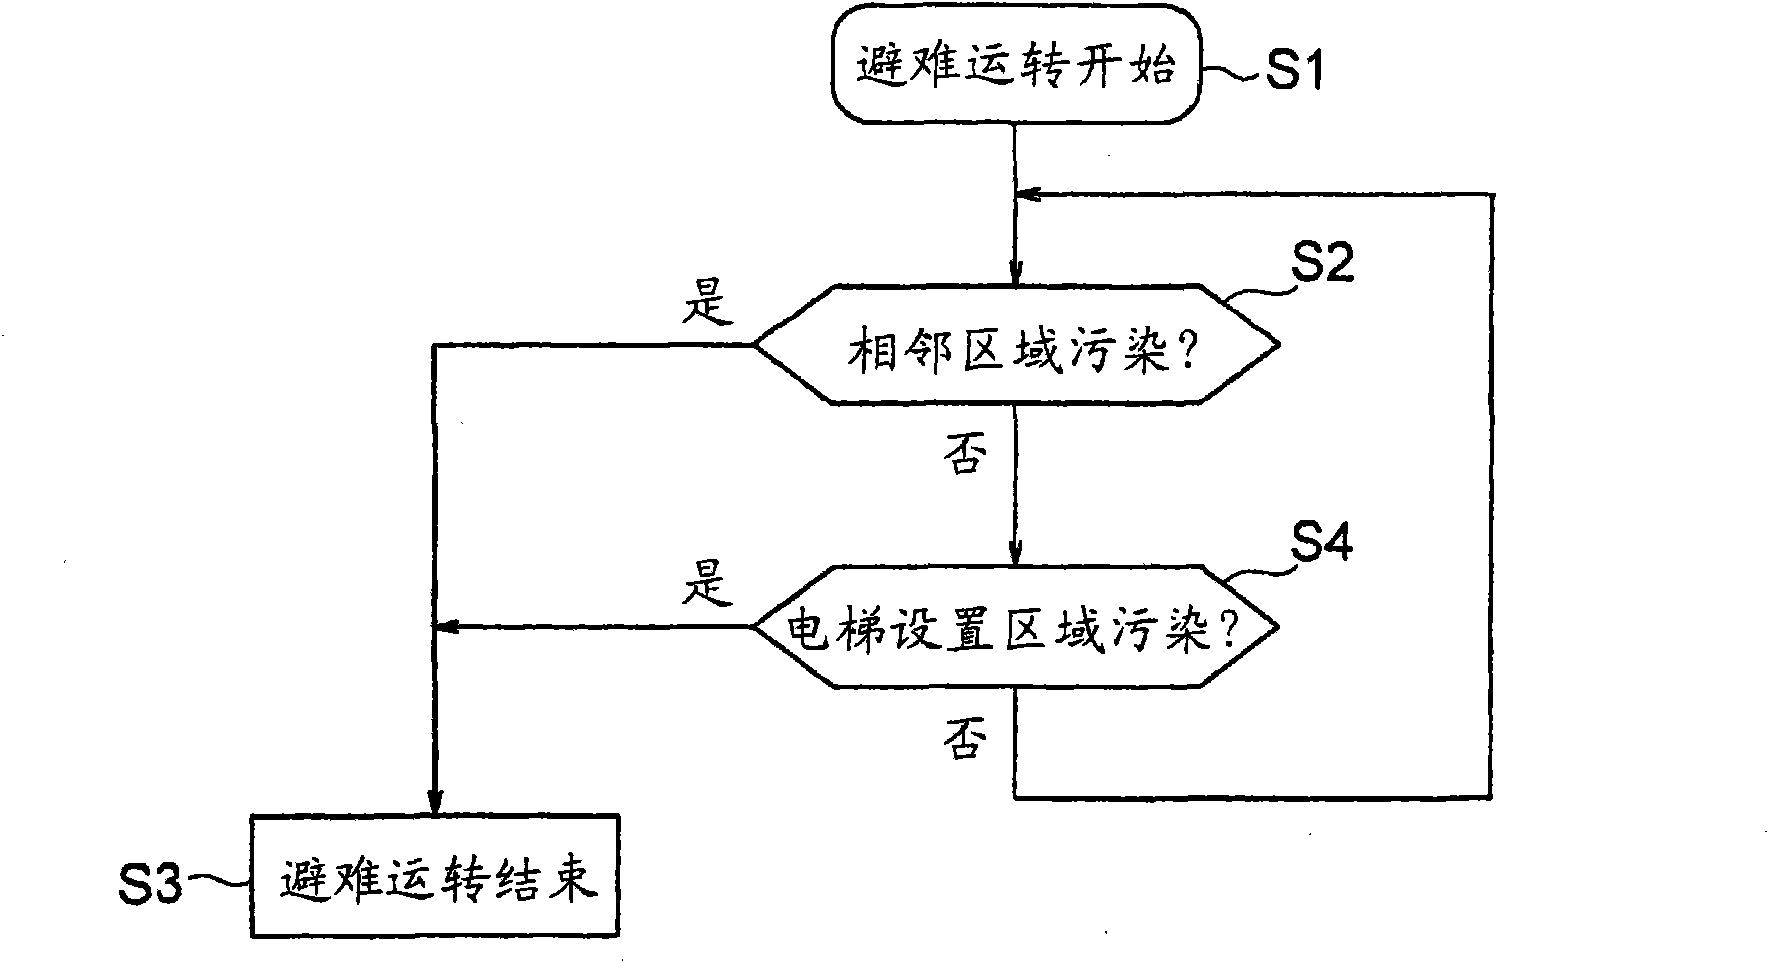 Fire evacuation support system and fire door control device